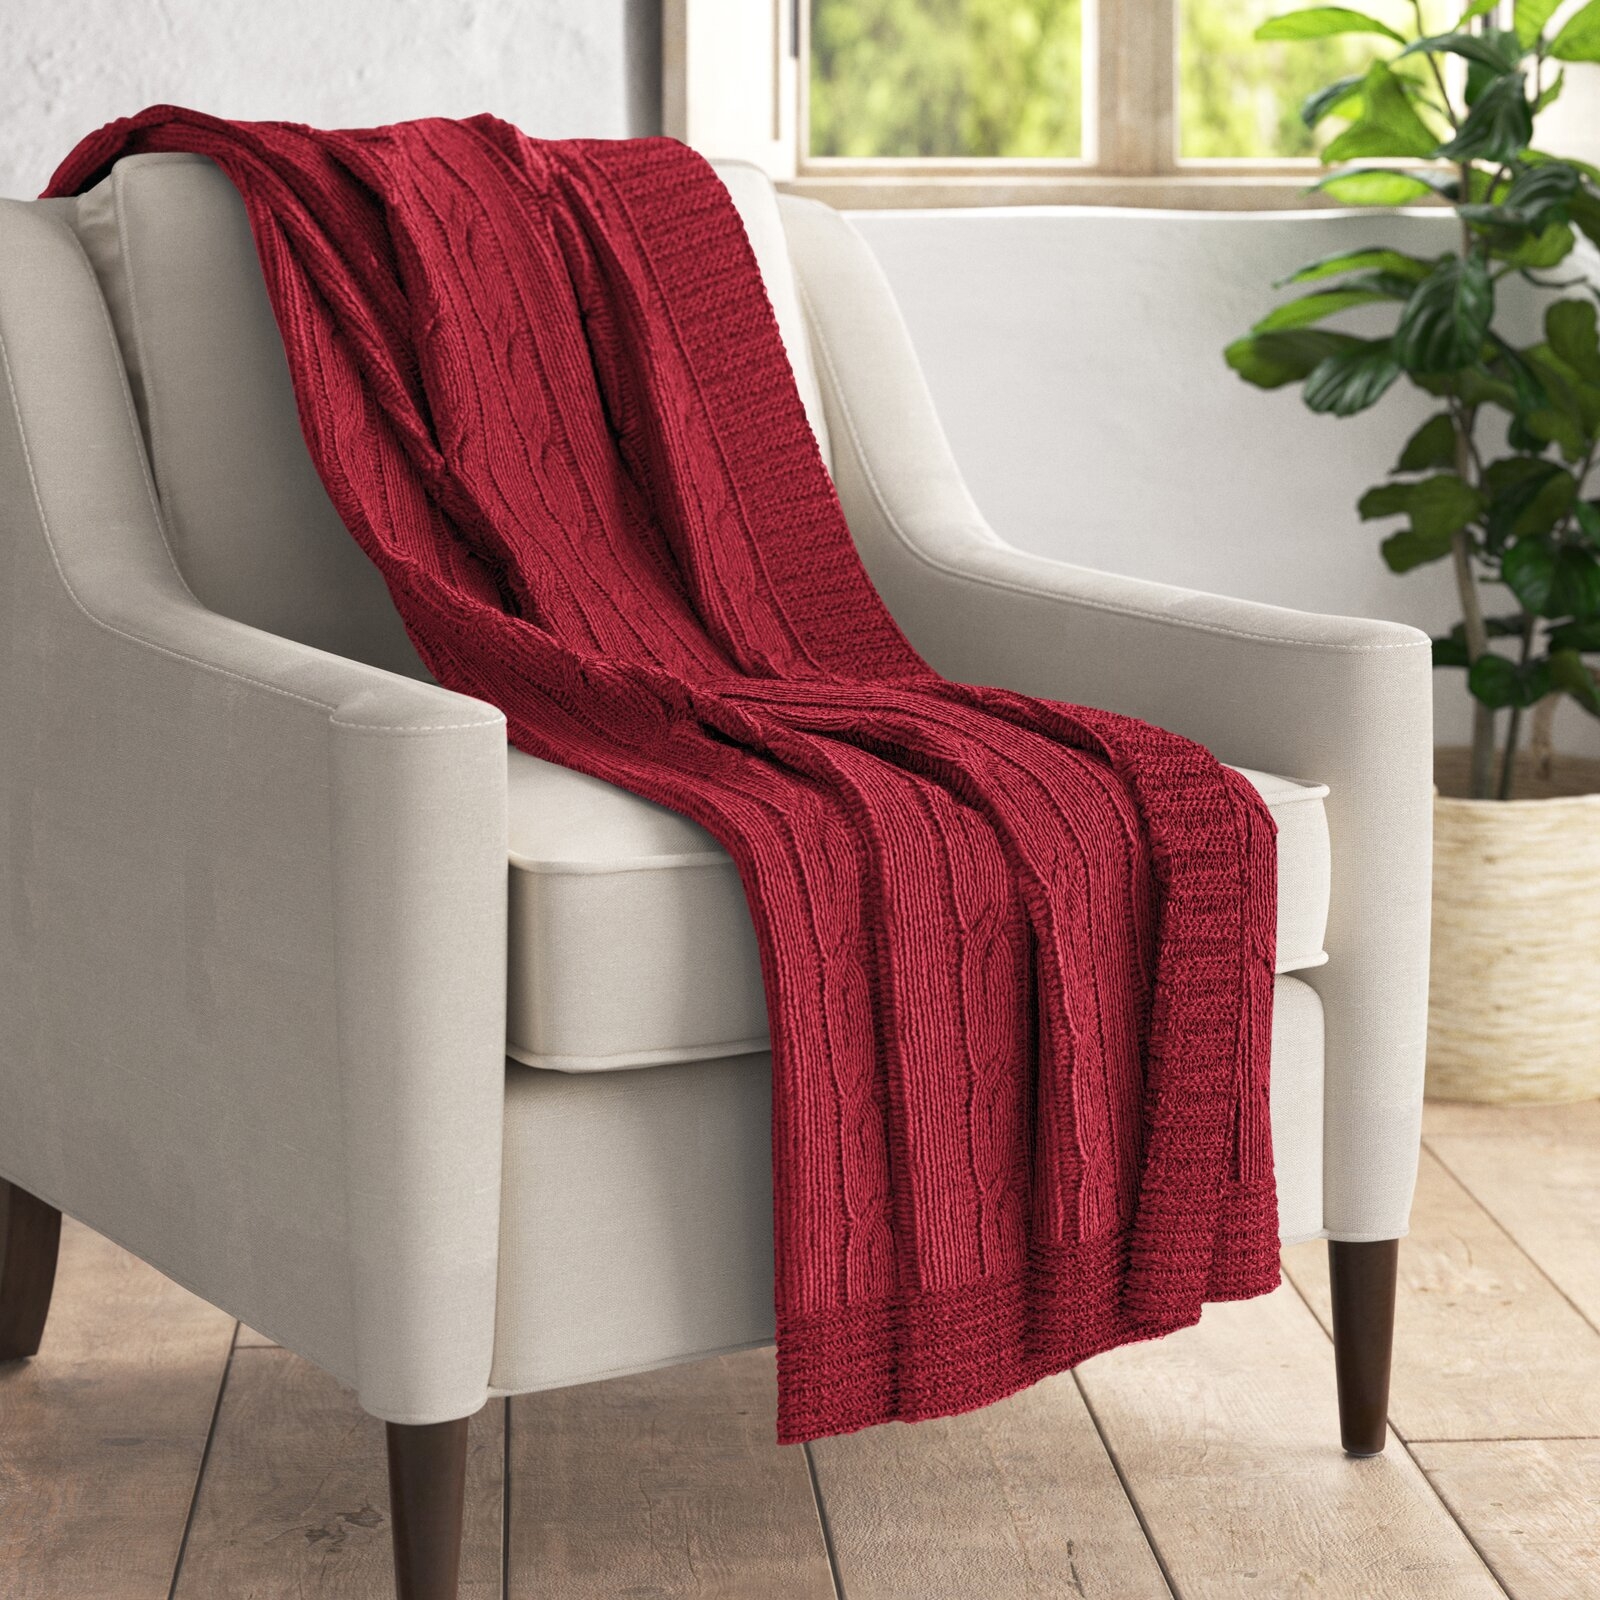 100% Cotton Cable Knit Blanket - Image 0